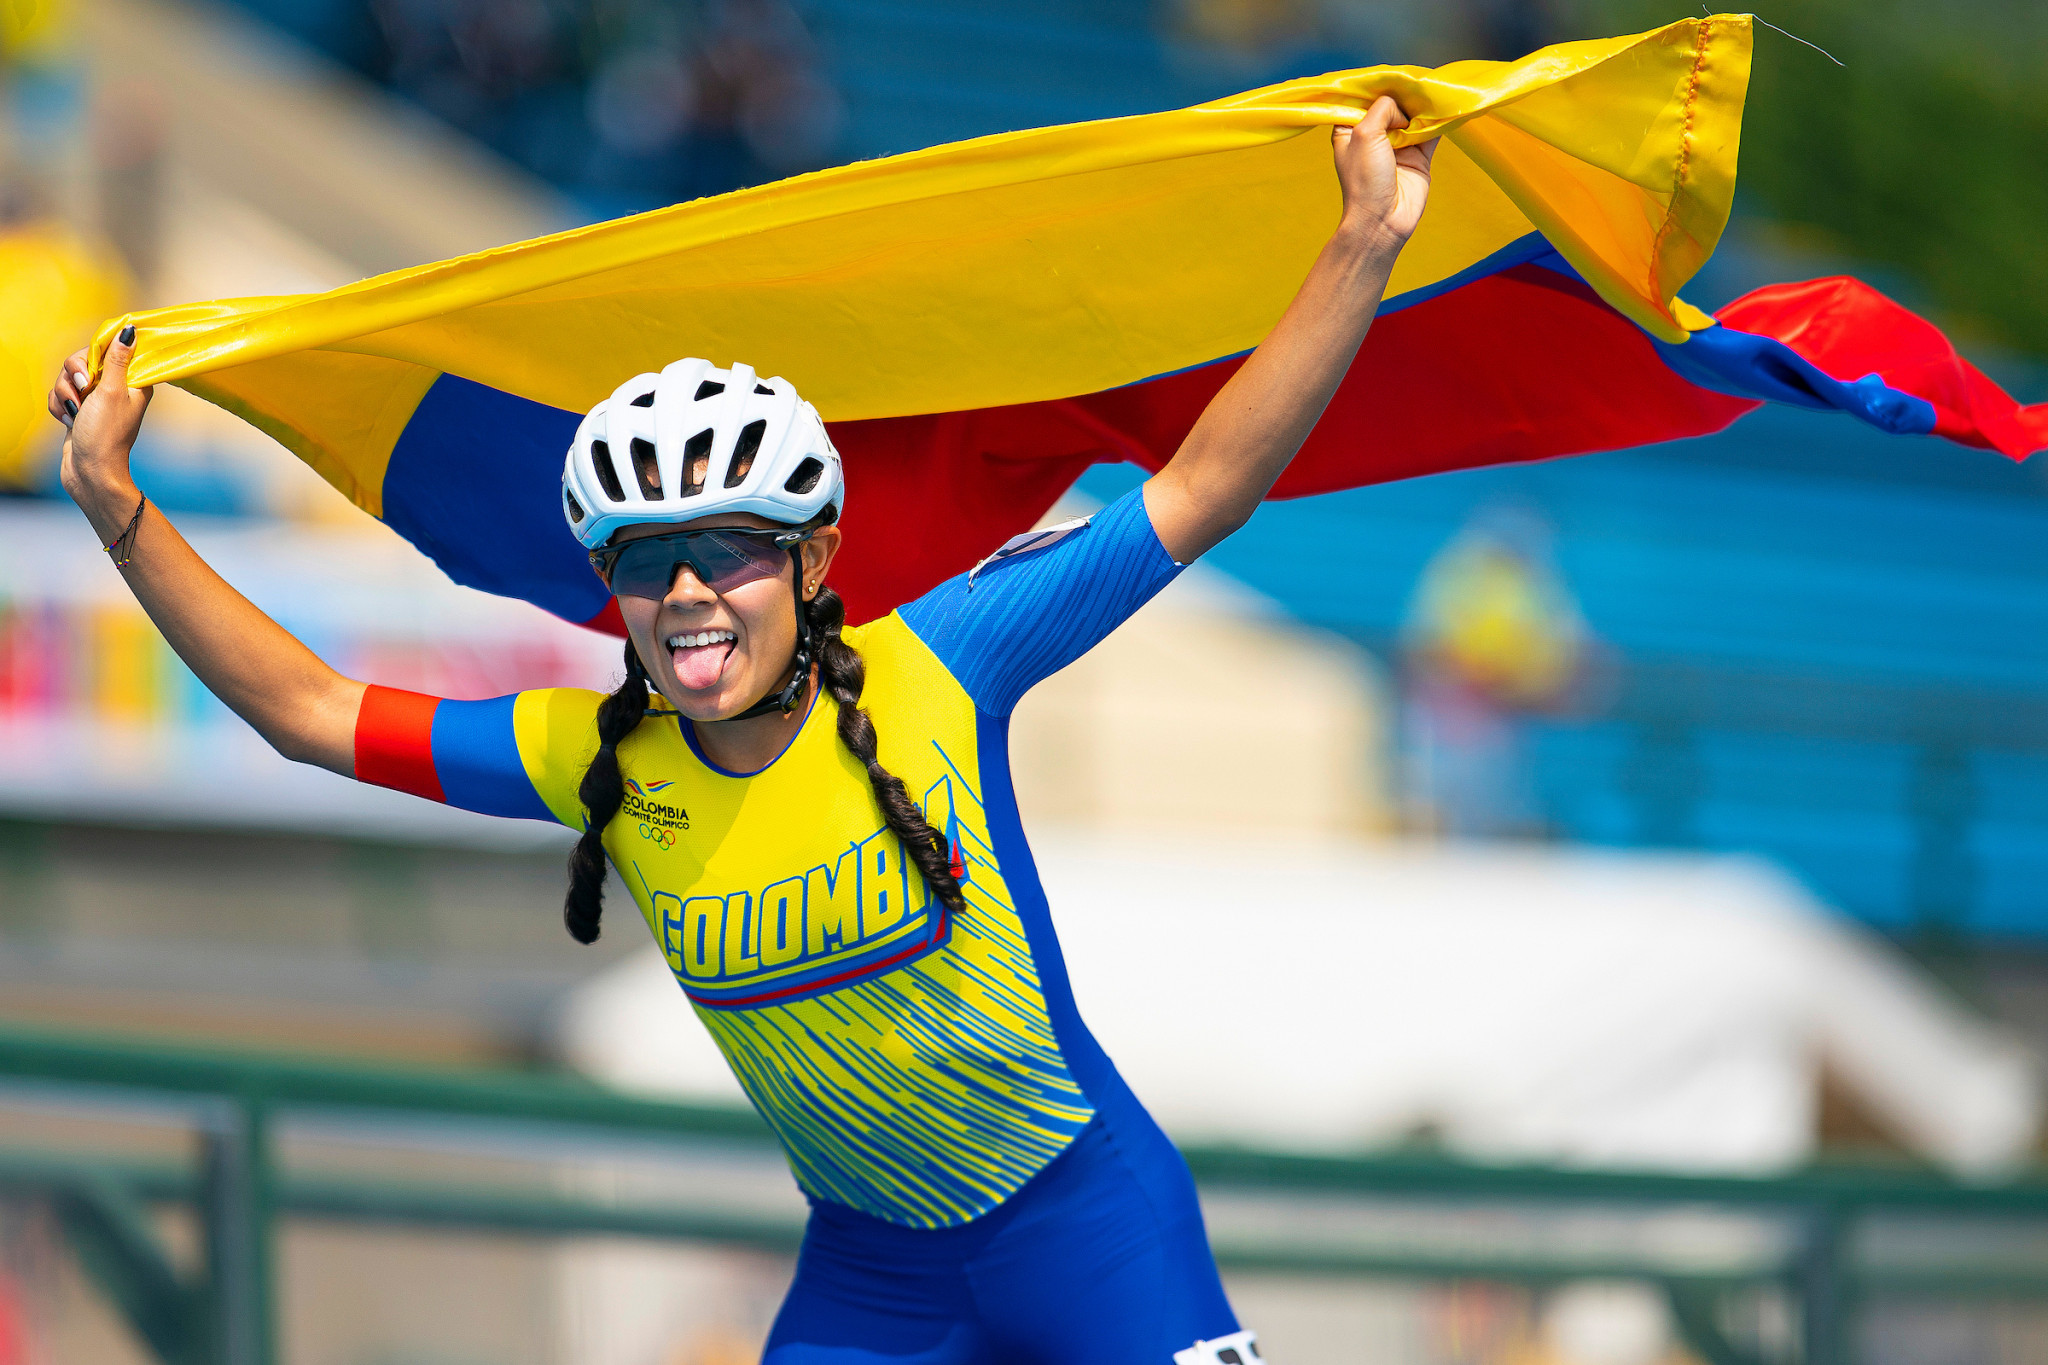 Colombia's Valeria Rodriguez claimed her second gold medal of the Games as she won the women's 500m speed skating race ©Agencia.Xpress Media